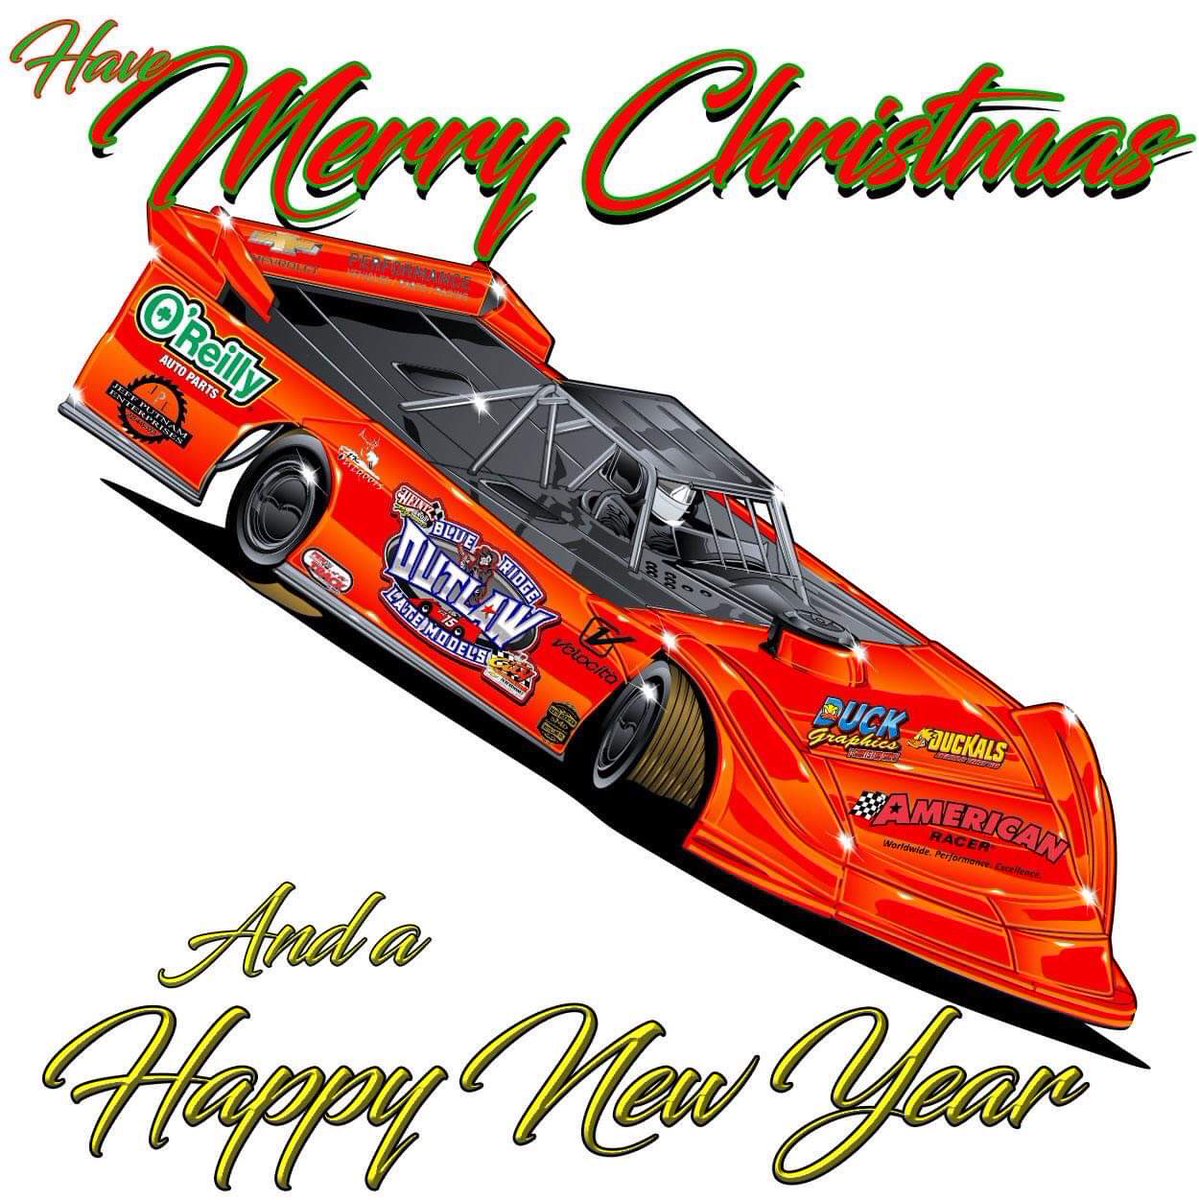 Merry Christmas and Happy New Year from everyone with the Blue Ridge Outlaws! 

#BlueRidgeOutlaws | #ShortTrackSaturdayNight